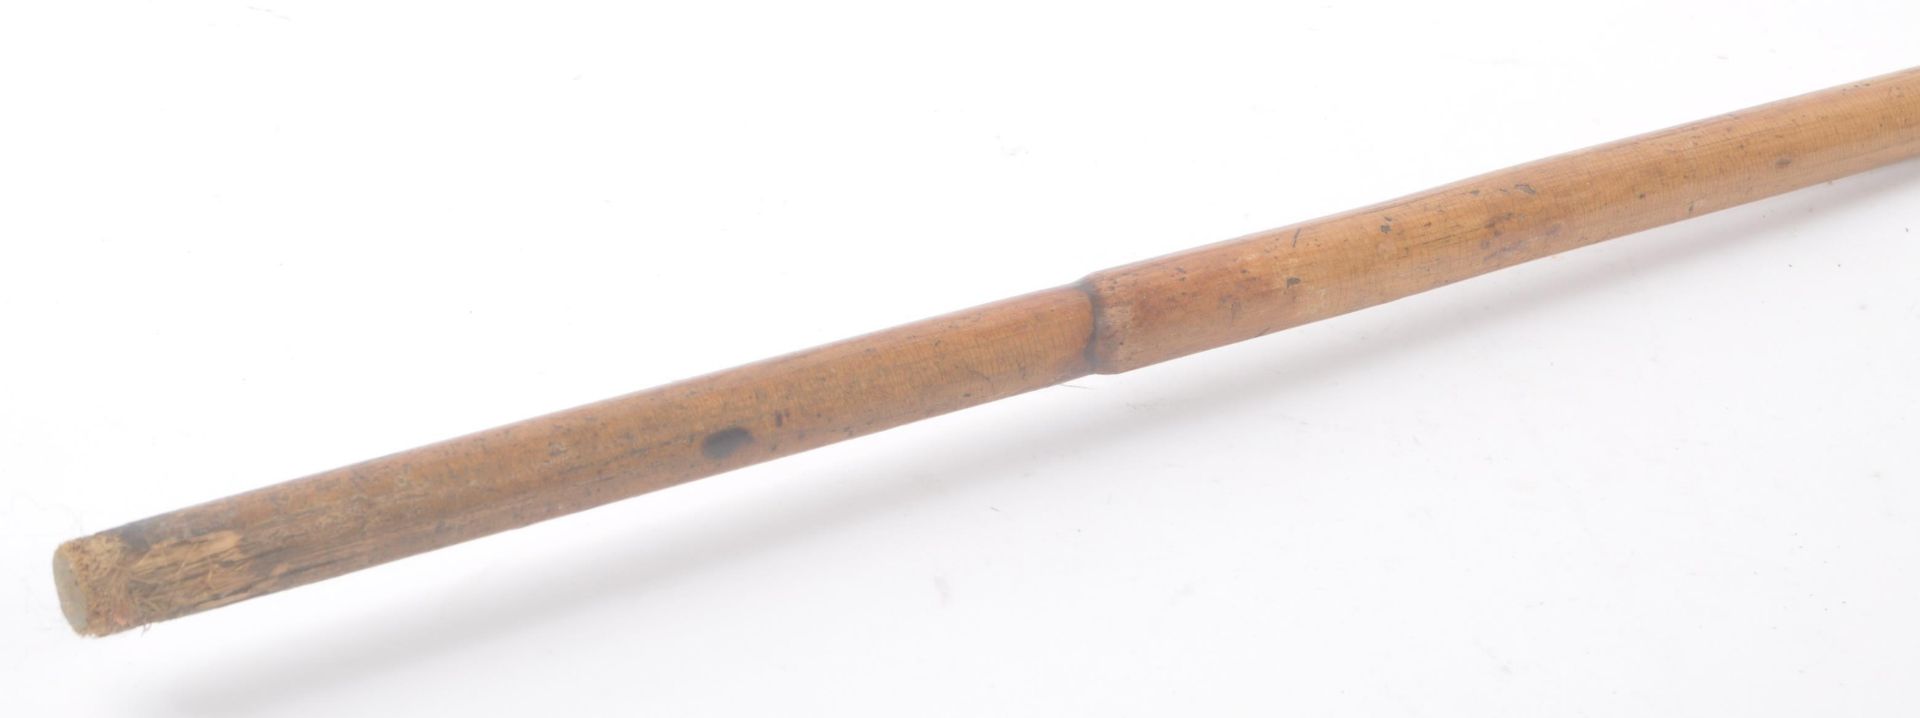 BAMBOO WALKING STICK WITH CARVED HORN HANDLE - Image 6 of 7